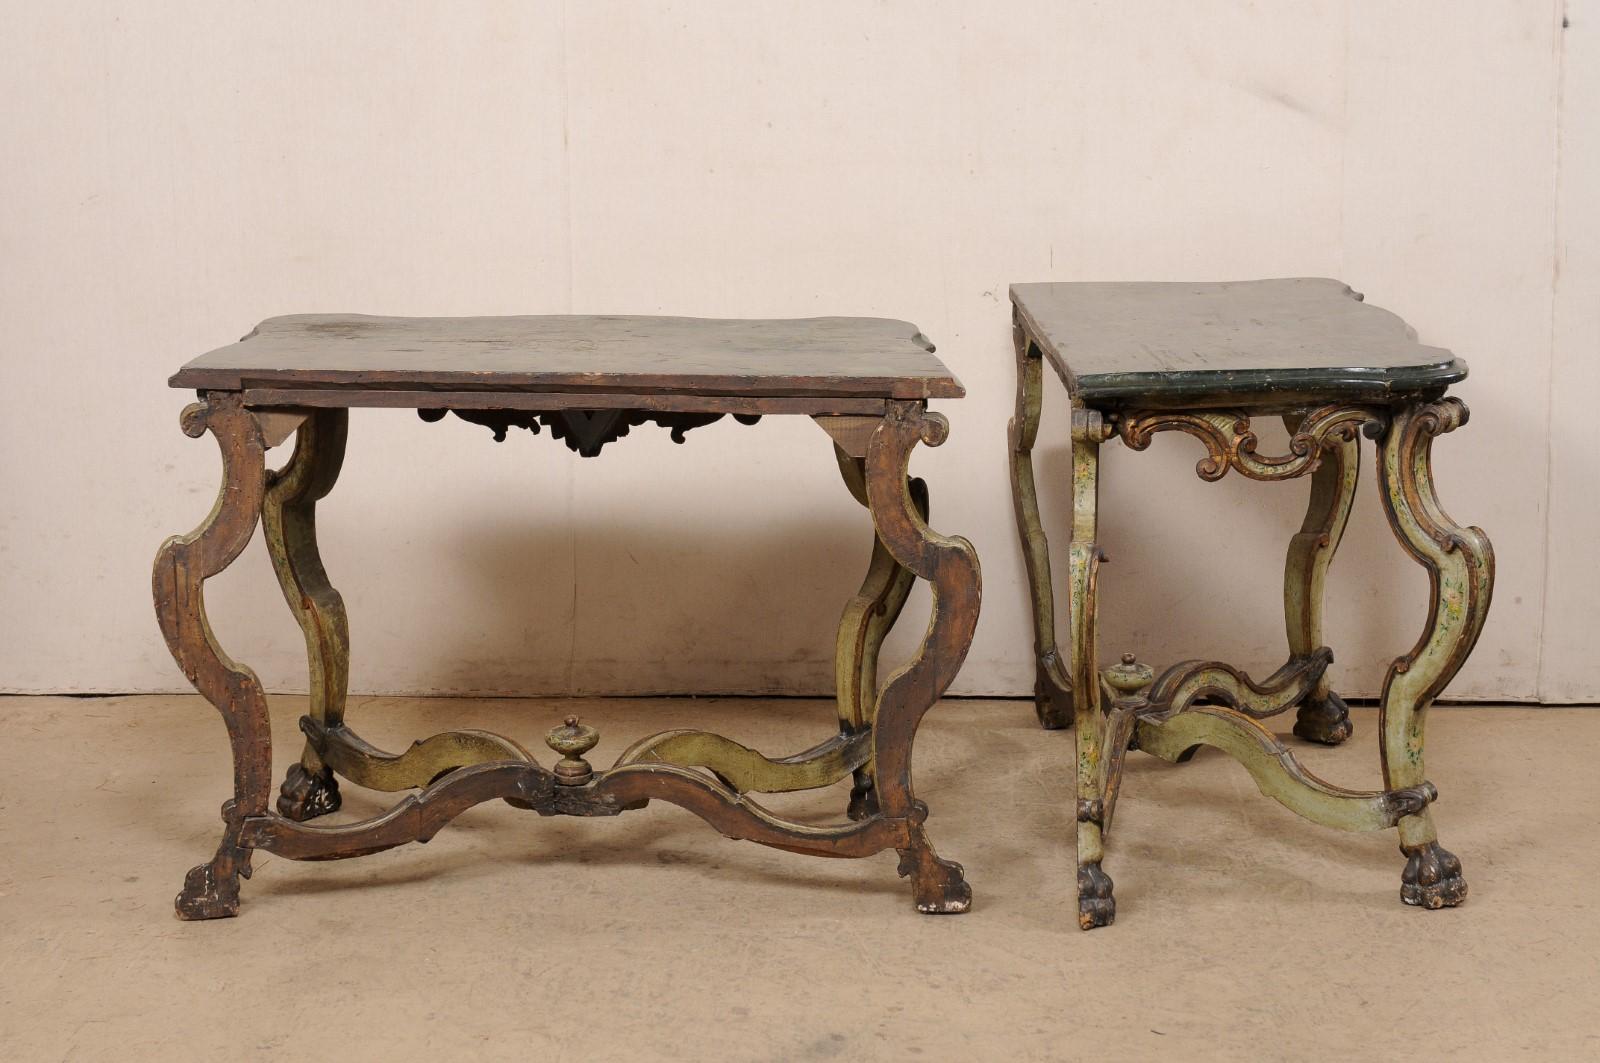 Exquisite Pair of 18th C. Italian Venetian Carved & Painted Wood Console Tables For Sale 4